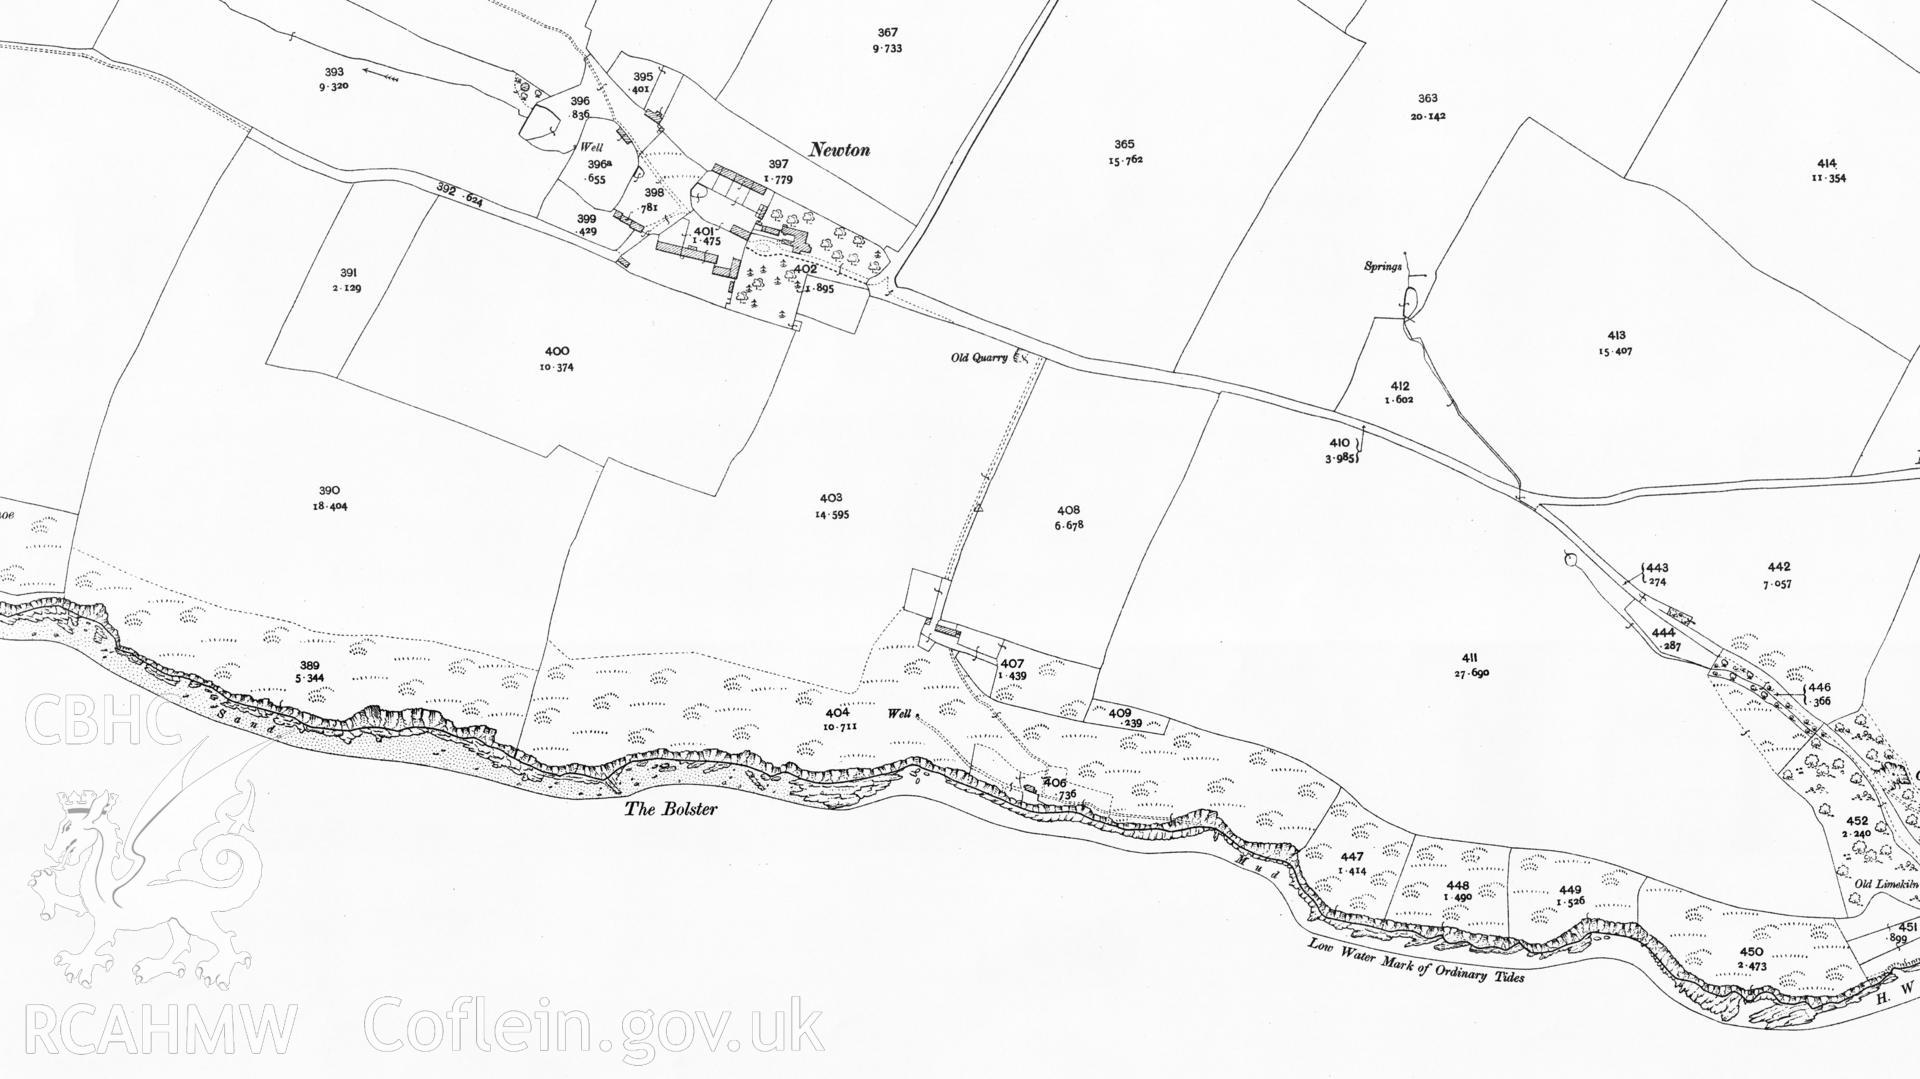 Digital copy of a 2nd edition OS map, showing the assessment area.